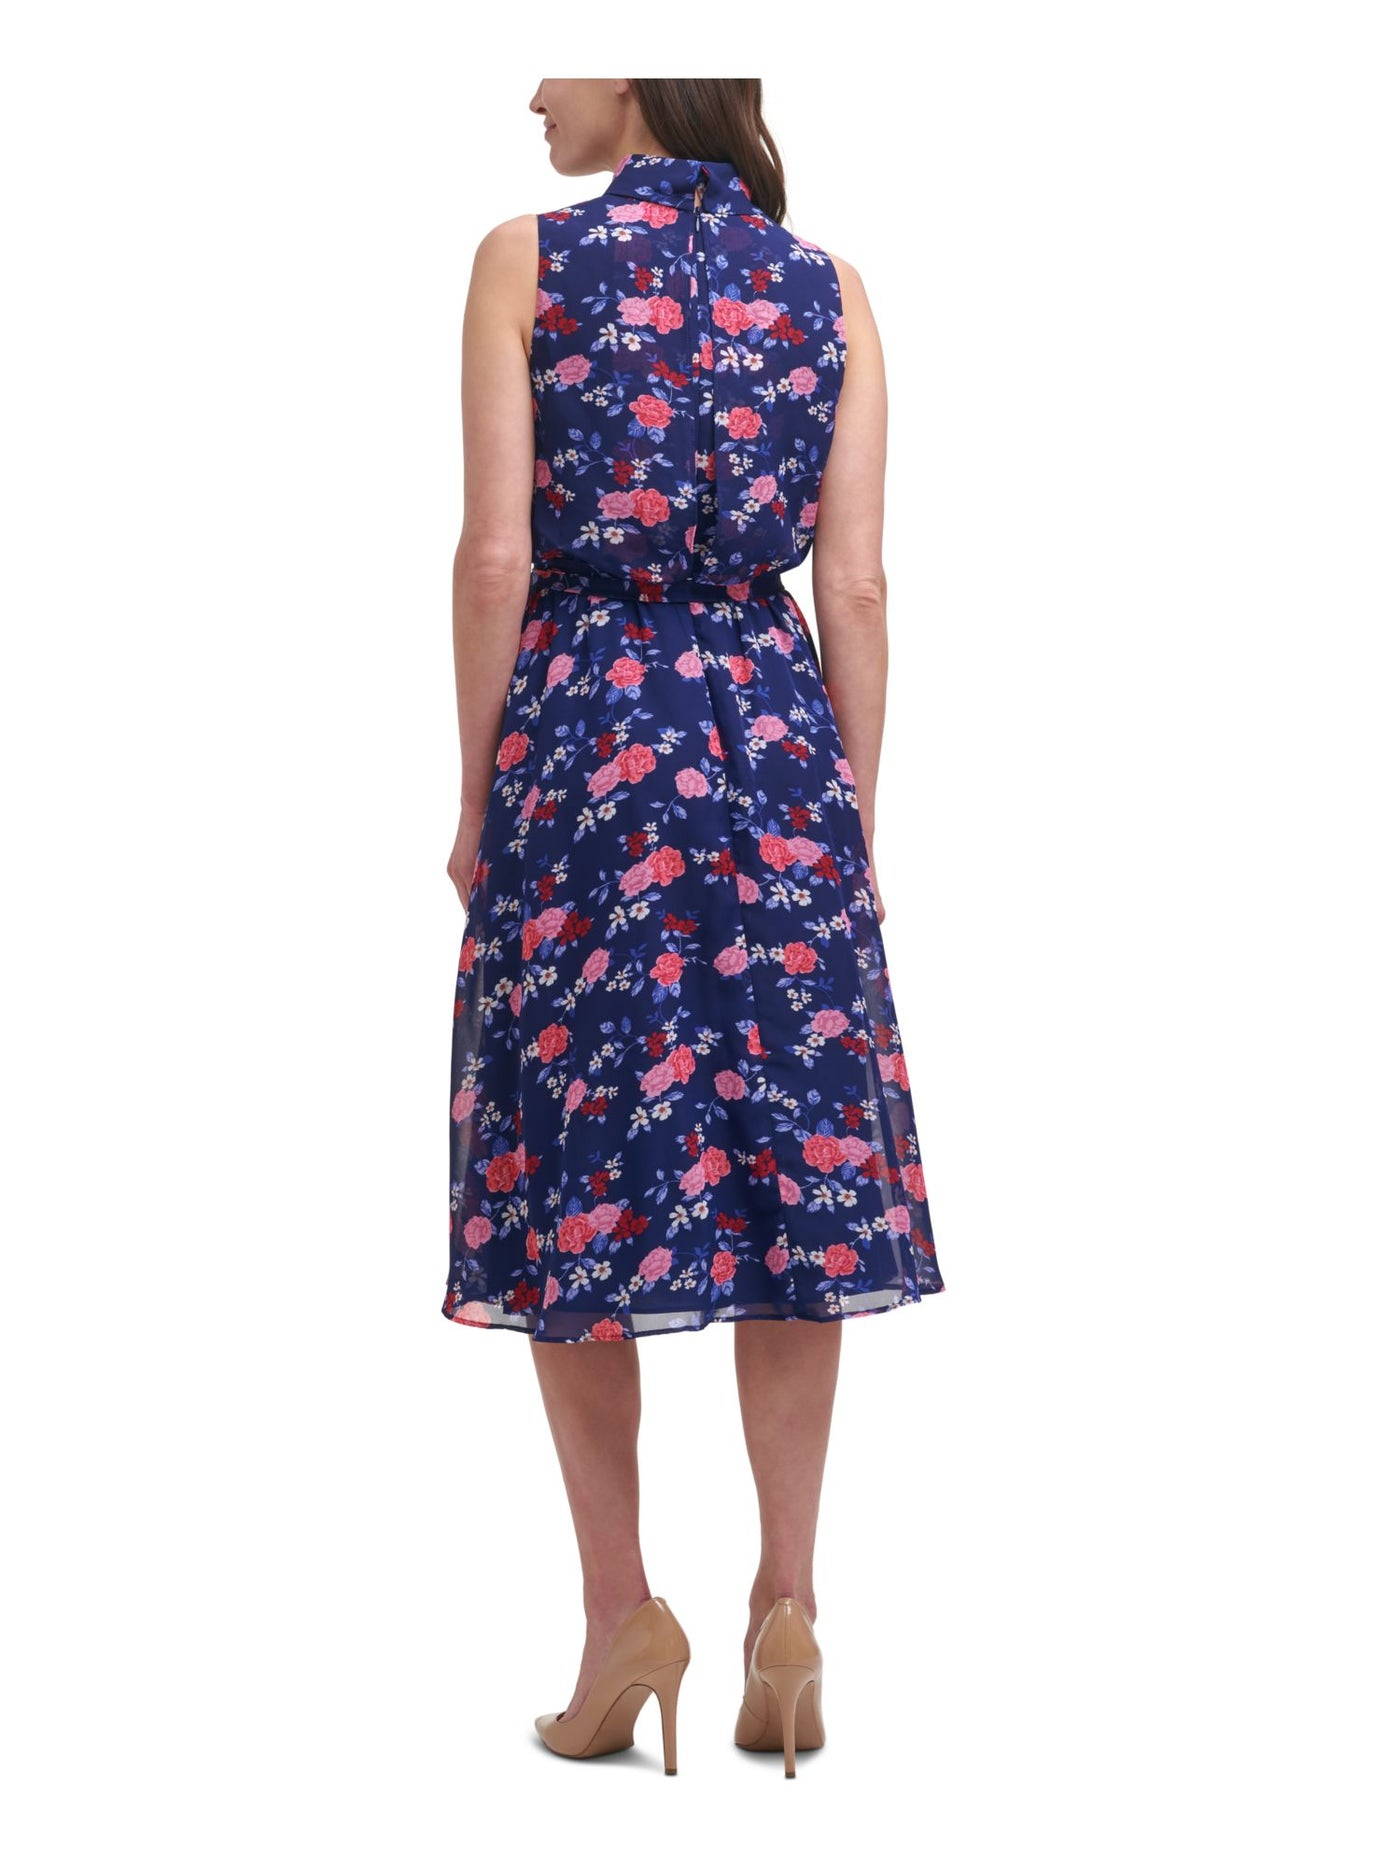 HARPER ROSE Womens Navy Zippered Belted Mock Roll-neck Chiffon Floral Sleeveless Midi Wear To Work Fit + Flare Dress 10